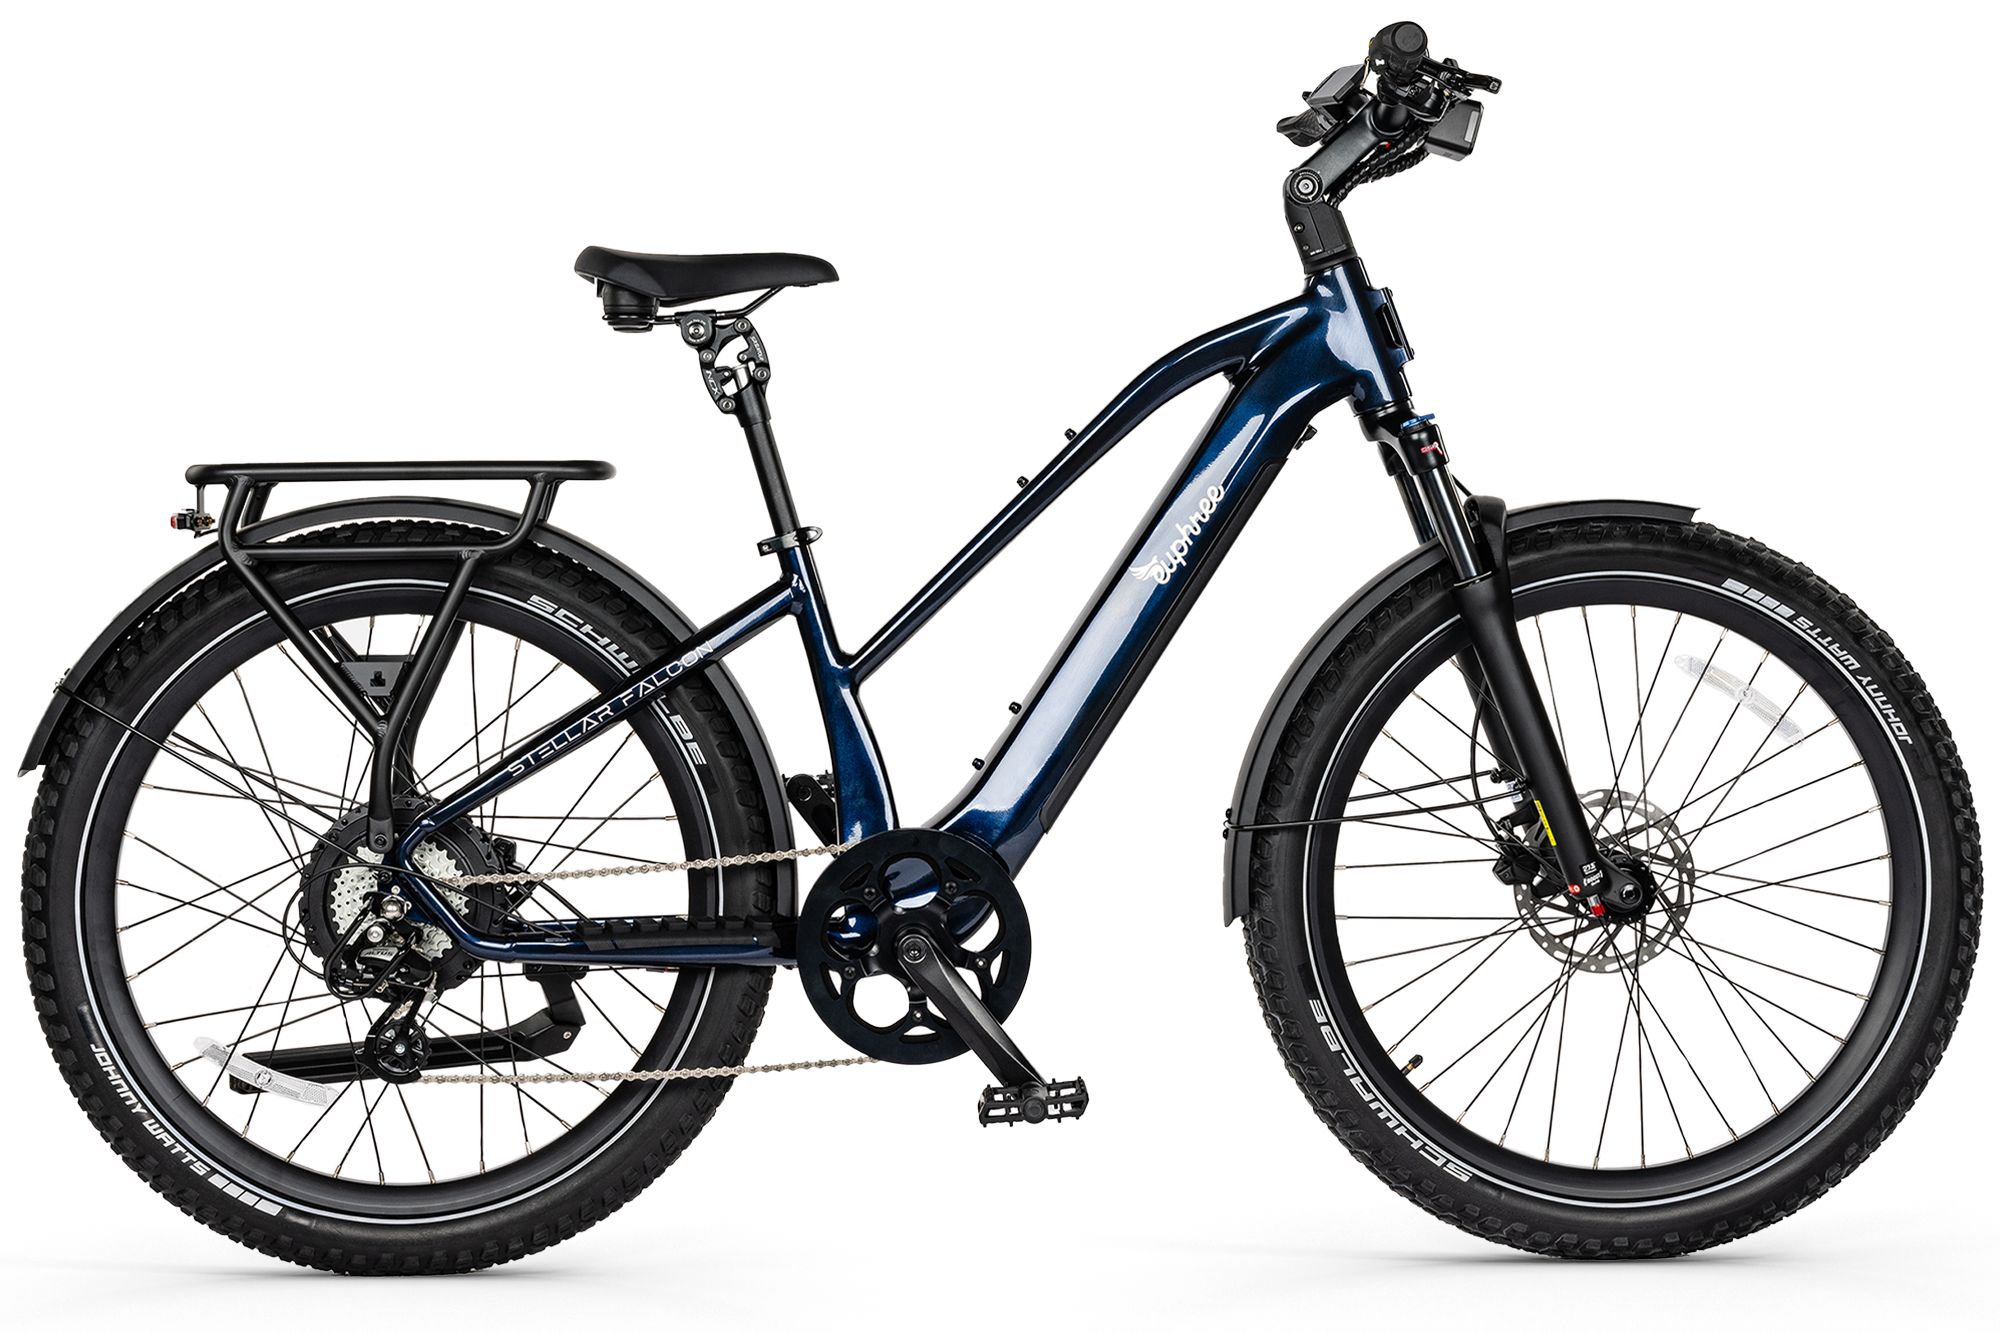 Vibrant Galaxy Blue Euphree Stellar Falcon electric bike showcasing its sleek design and robust frame, perfect for both urban commuting and off-road adventures.